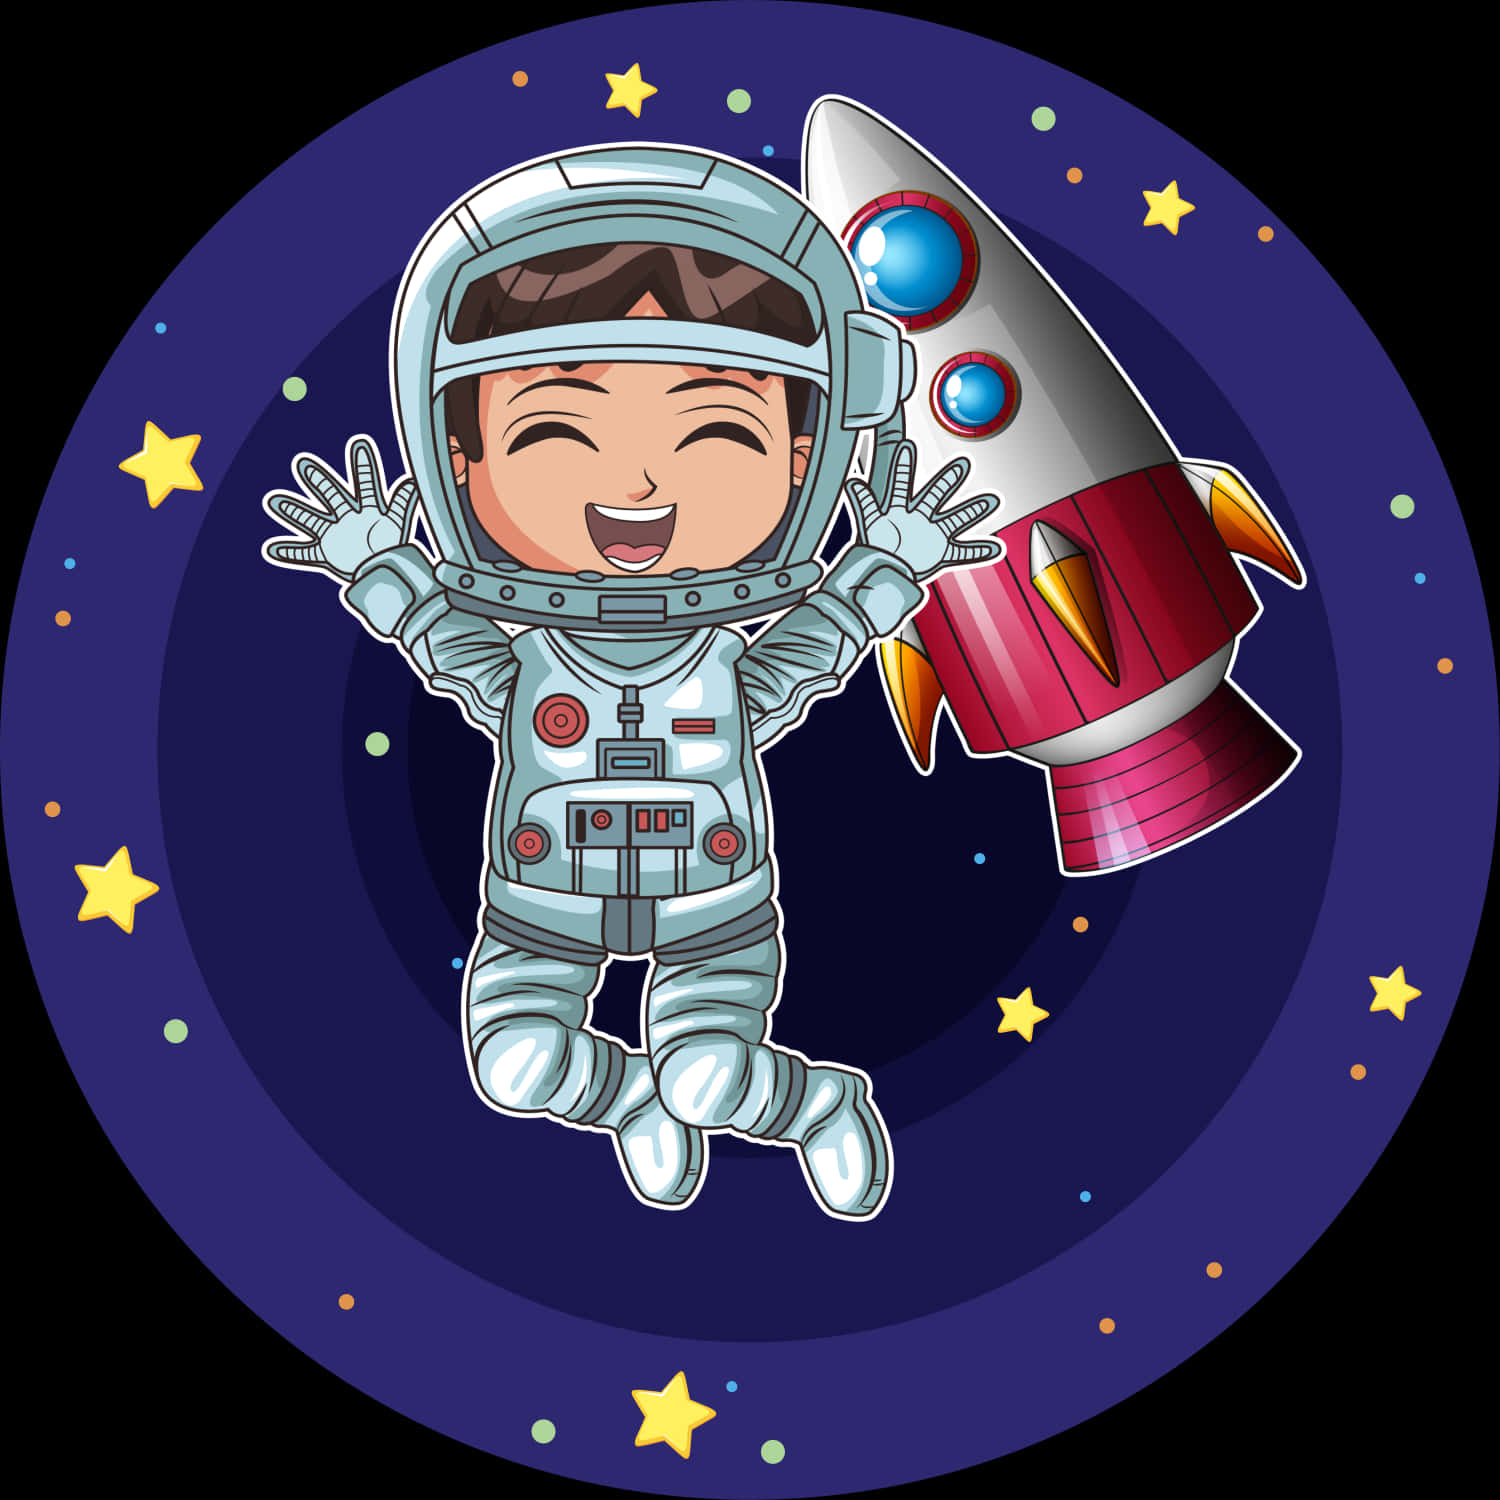 A Cartoon Of A Boy In Space Suit And A Rocket